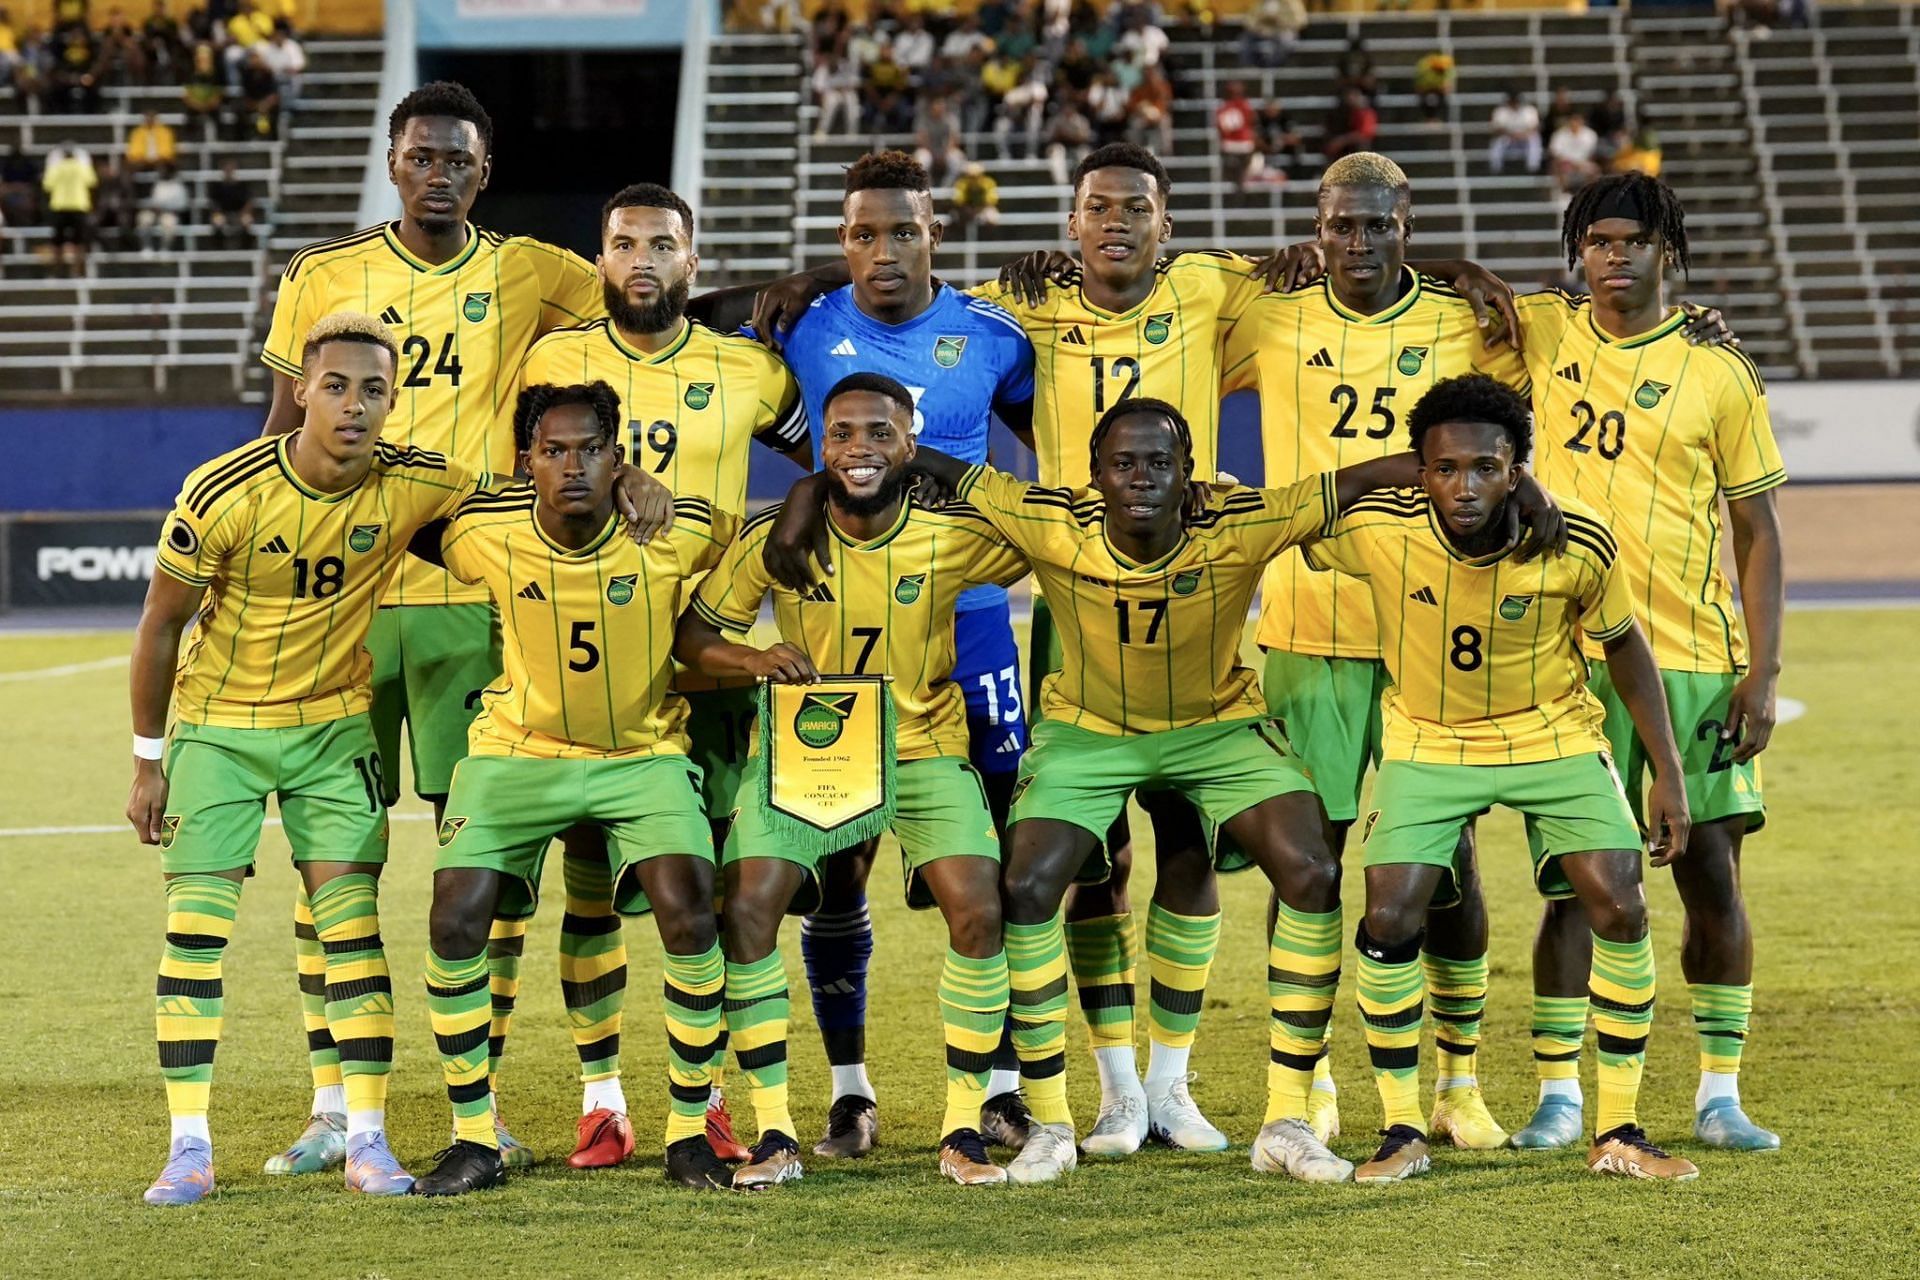 Jamaica have never lost to Saint Kitts 